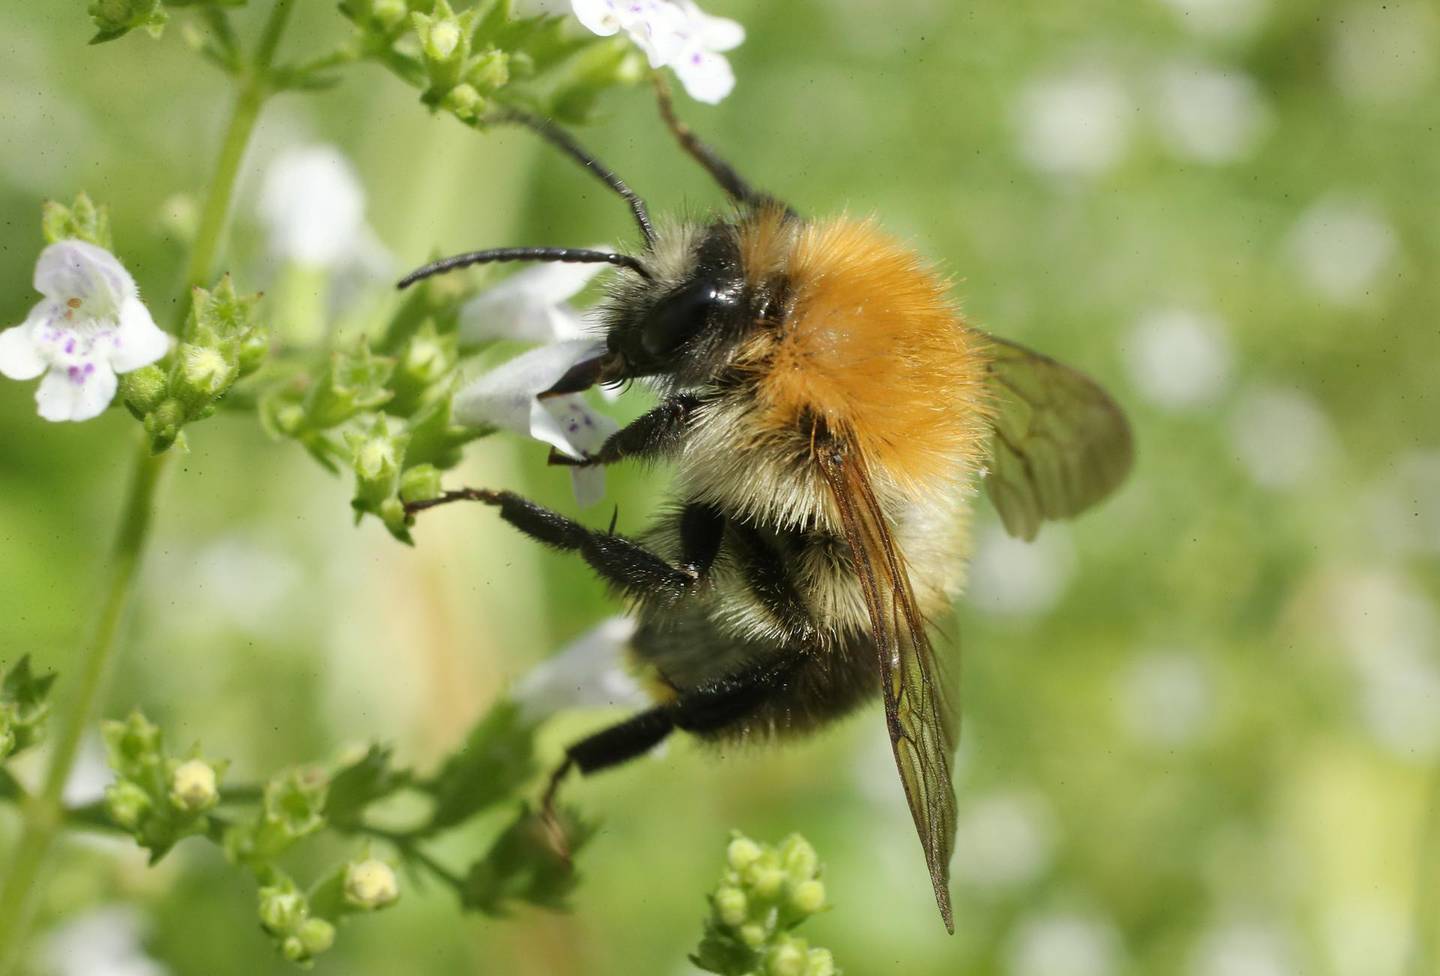 BERLIN, GERMANY - AUGUST 09:  A common carder bumblebee (bombus pascuorum, in German called an Ackerhummel) prods flowers for nectar in an urban garden in the city center on August 9, 2018 in Berlin, Germany. NABU (Naturschutzbund Deutschland, or Federation for Nature Protection Germany), Germany's biggest NGO for conservation and the study of nature, is leading an "insect summer" project that calls on volunteers across Germany to take an hour and count the various insects they find in a particular location. Thousands of people, both in urban and rural locations, are taking part. The project, which runs through August 12, is designed to raise public awareness over Germany's insect diversity. A study released last year conducted by entomologists over several years showed a strong decline in the shear numbers of insects in Germany, presumably due to the use of pesticides by farmers and the disruption of natural habitats.  (Photo by Sean Gallup/Getty Images)